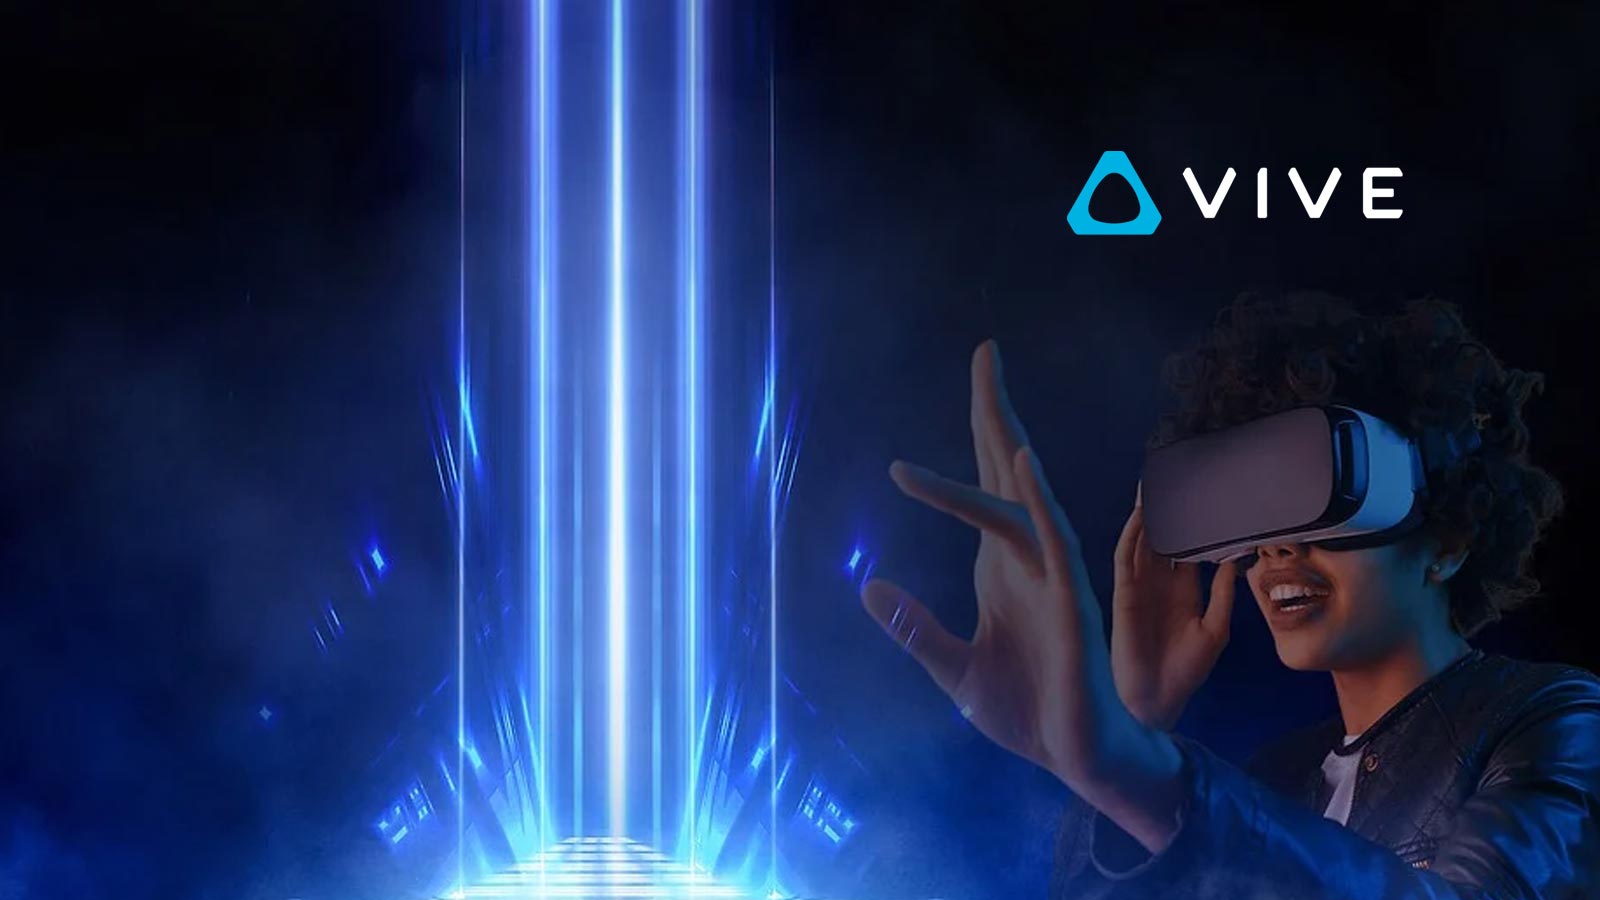 HTC VIVE Showcases Advancements in VR Health and Entertainment at SXSW 2022